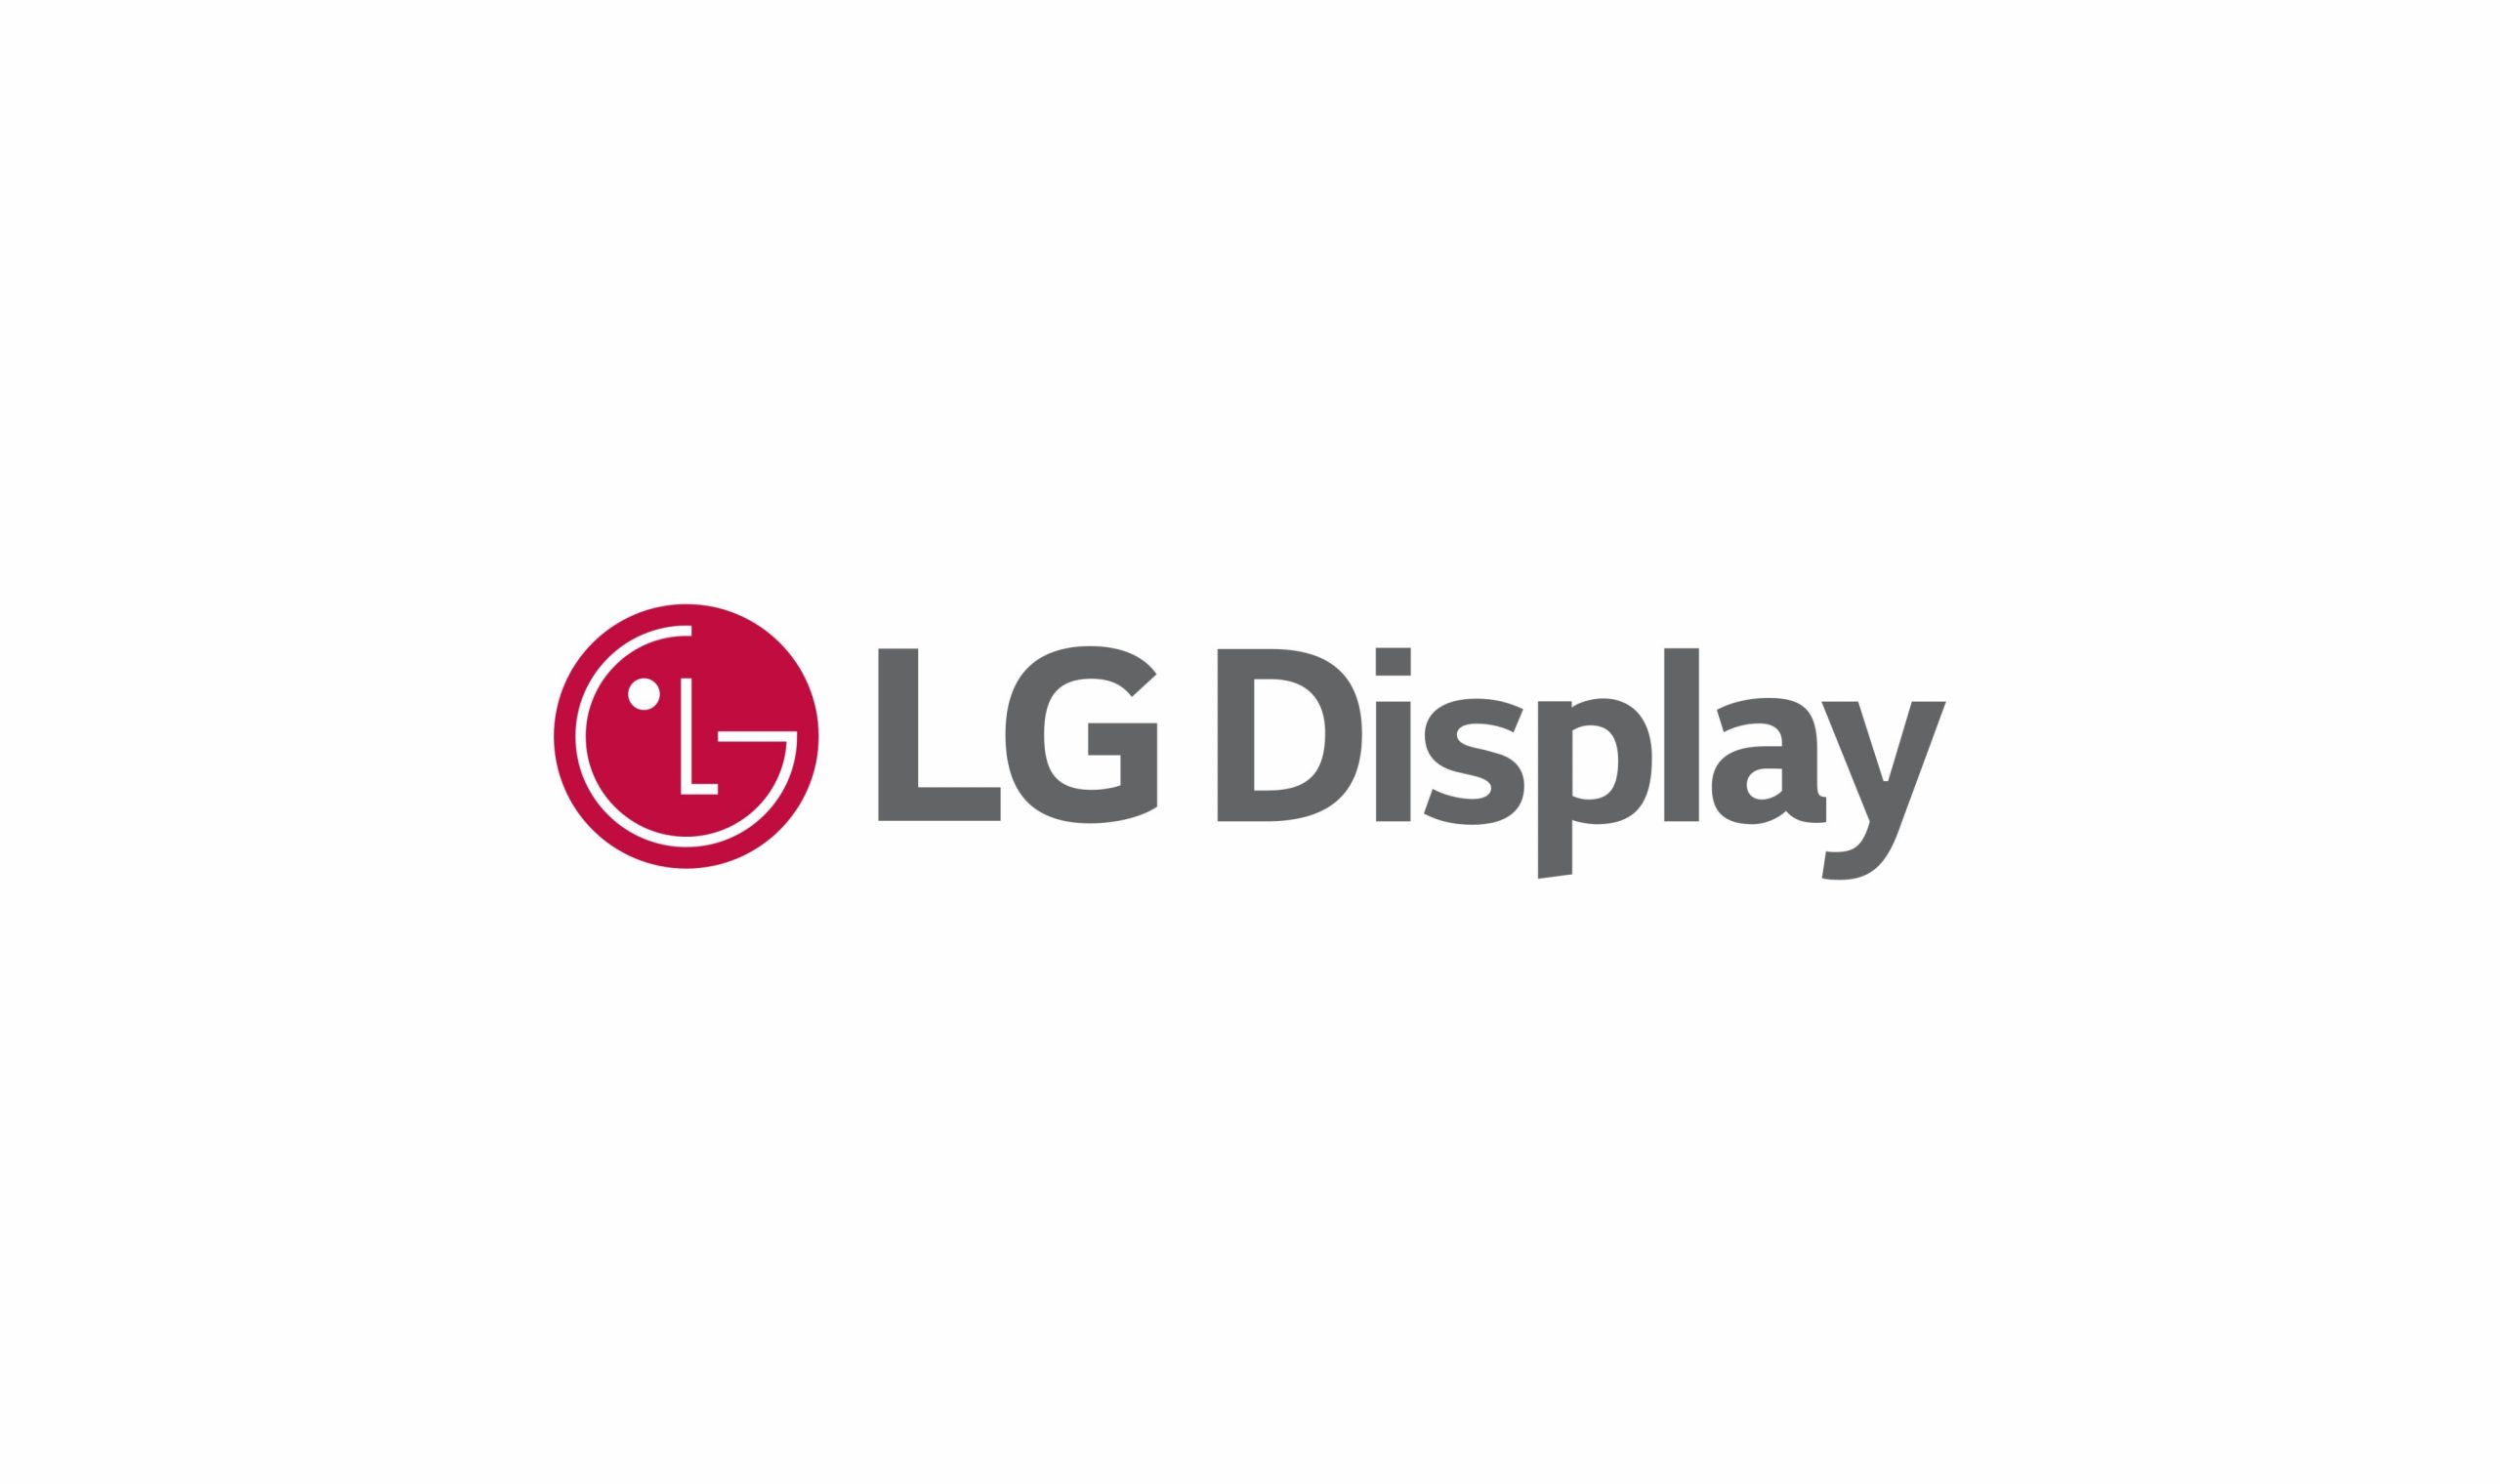 LG Display to ship only 3.6 million units of large-sized OLED panels in 2020